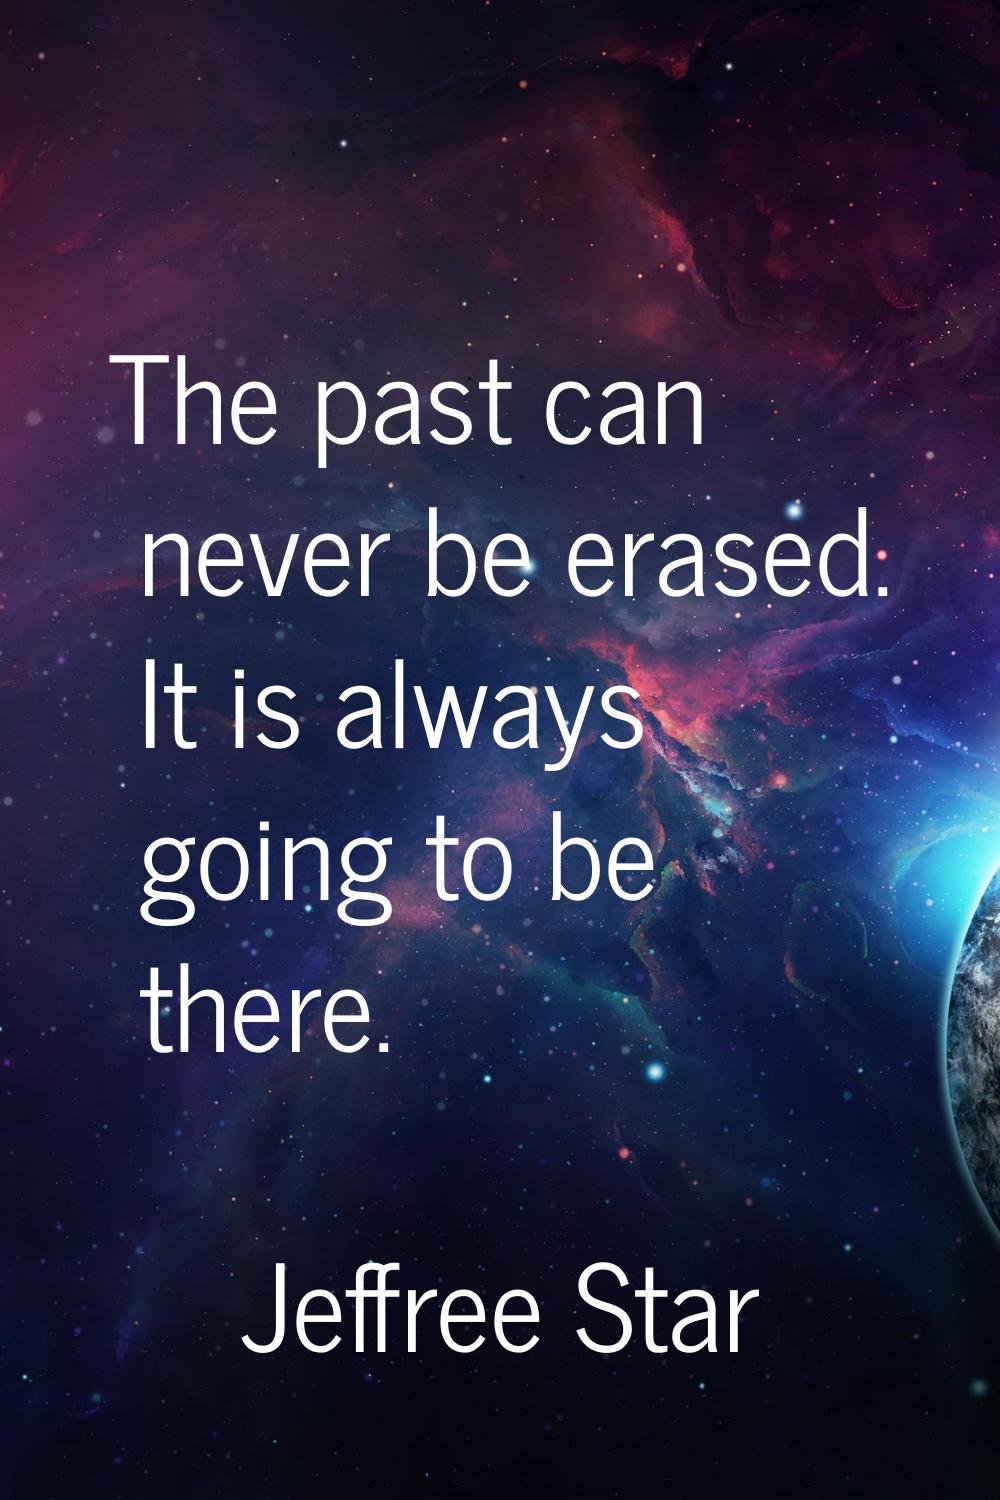 The past can never be erased. It is always going to be there.